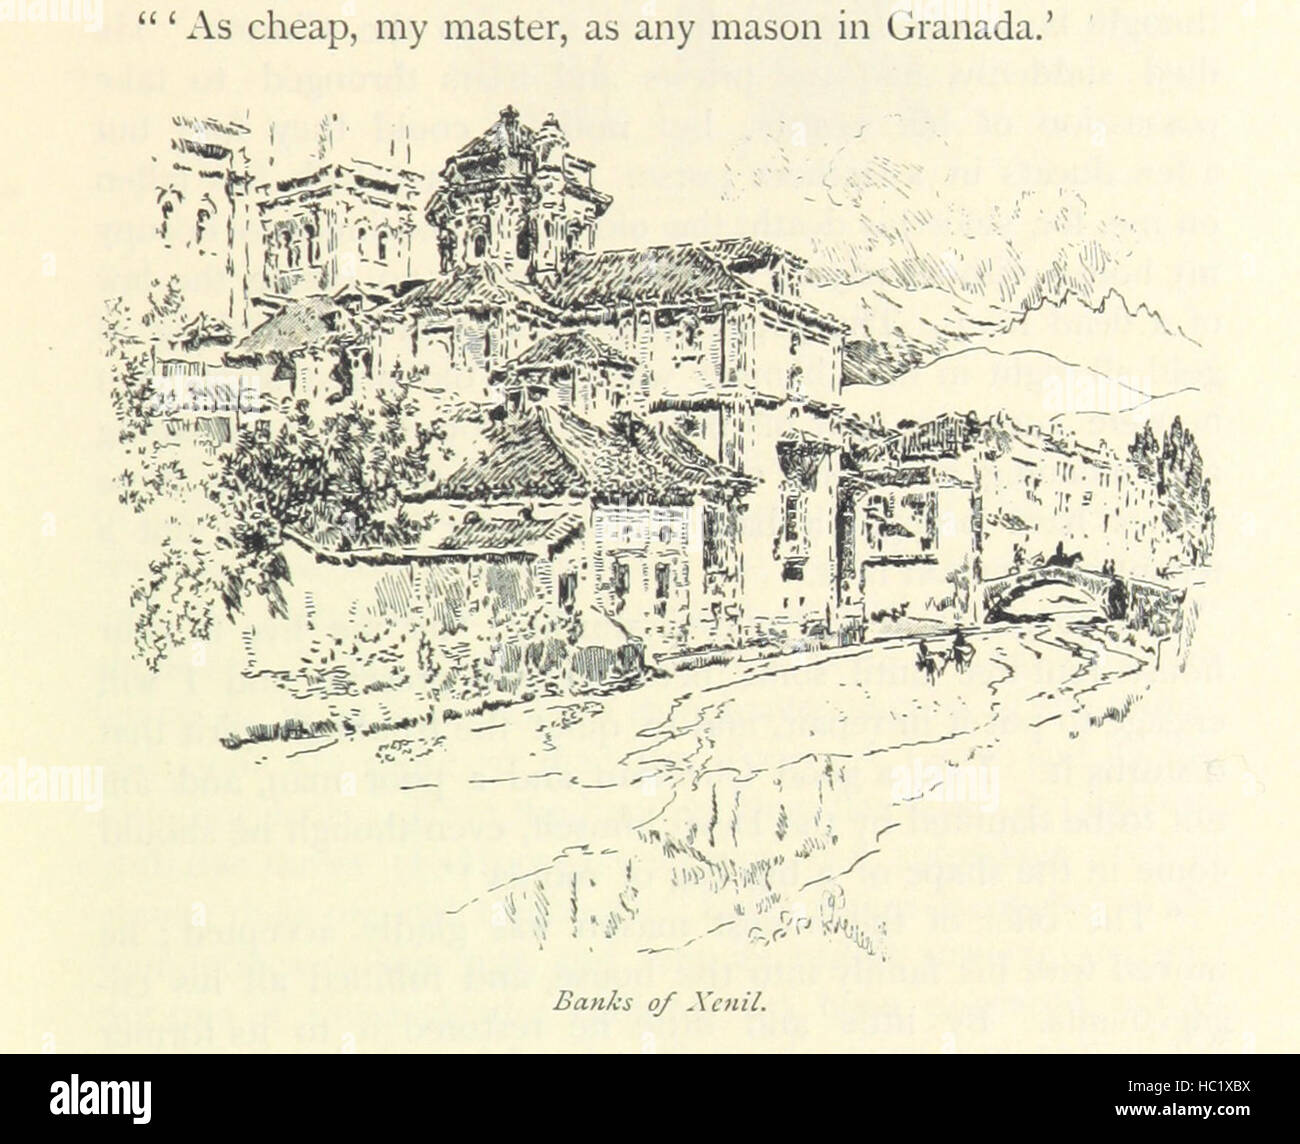 Image taken from page 173 of 'The Alhambra ... With an introduction by E. R. Pennell. Illustrated with drawings of the places mentioned by J. Pennell' Image taken from page 173 of 'The Alhambra  With Stock Photo